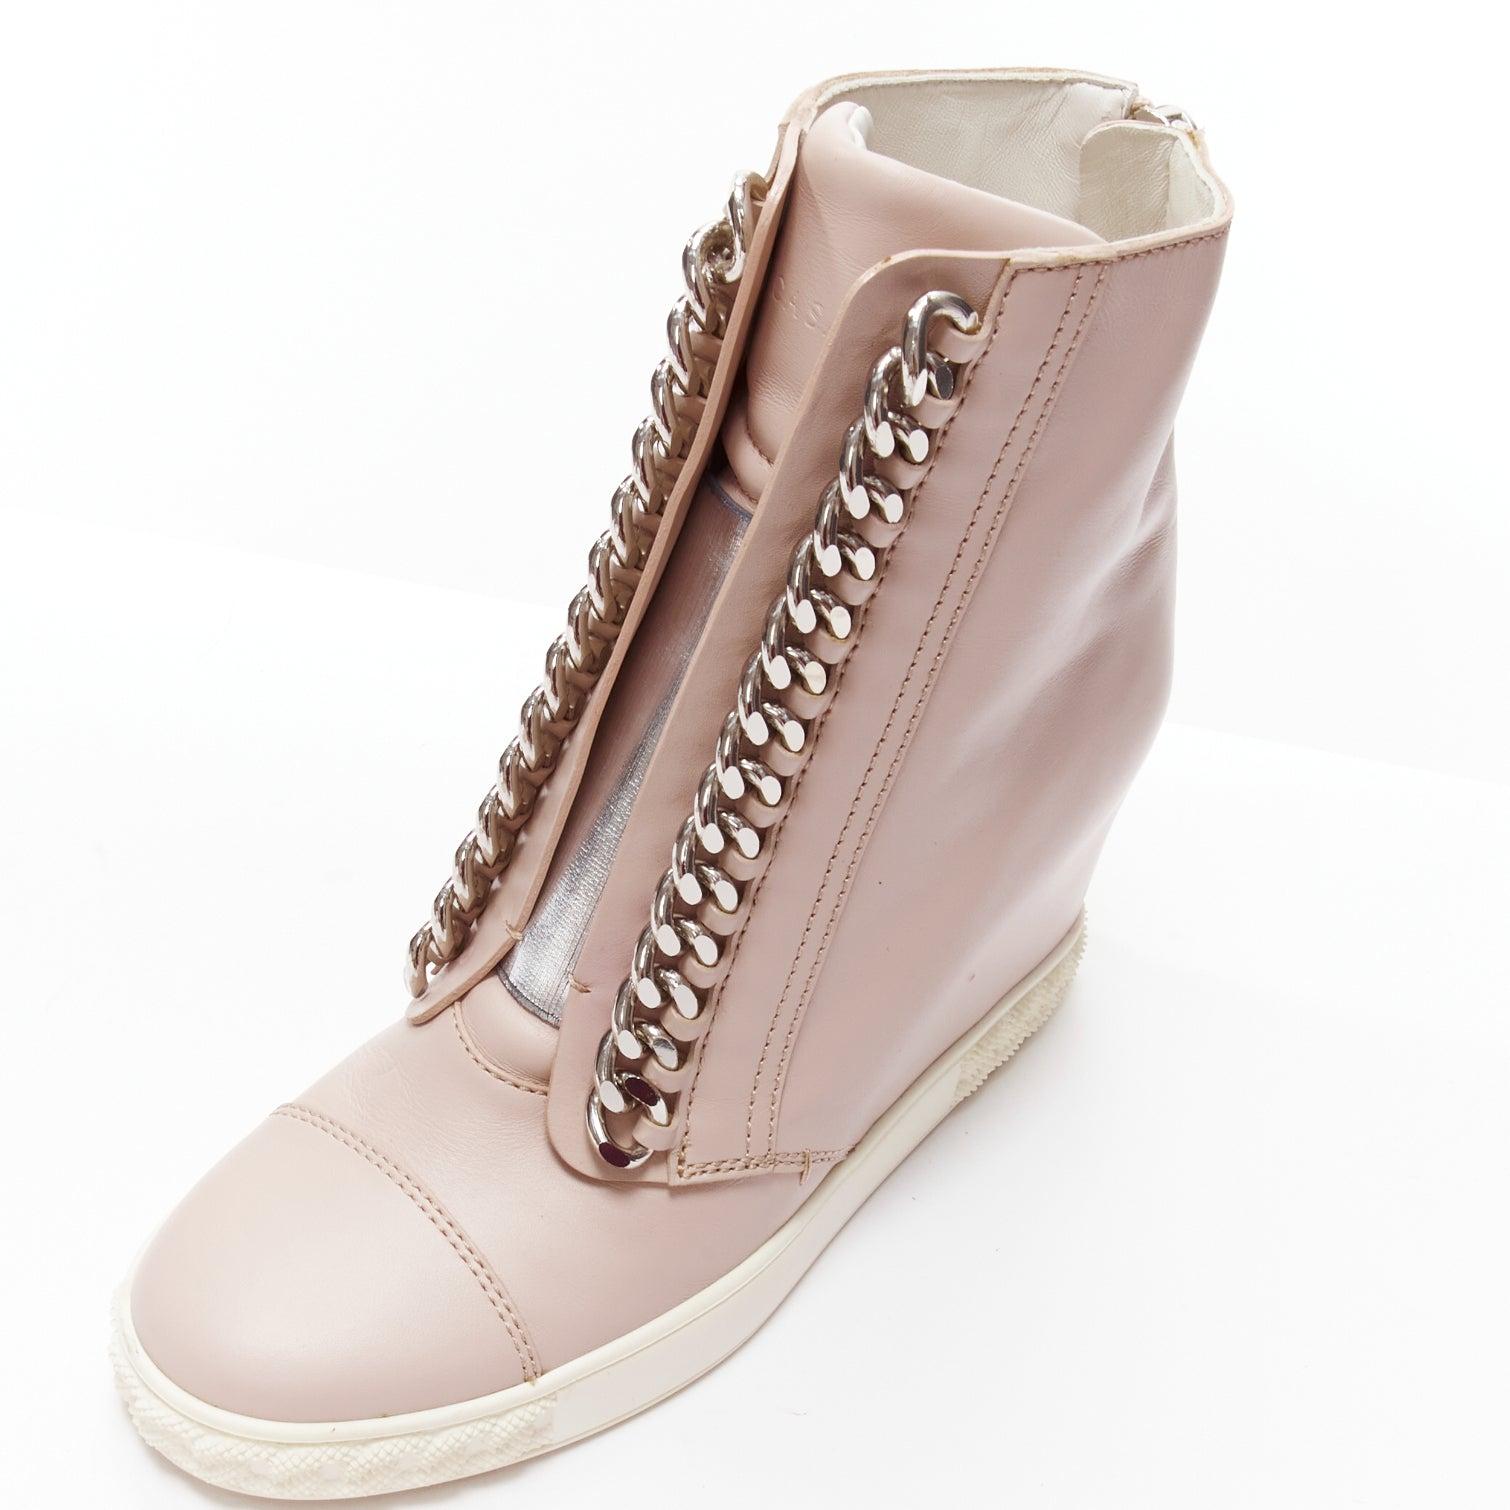 CASADEI pink leather silver chain trim ankle wedge sneakers EU39.5 For Sale 2